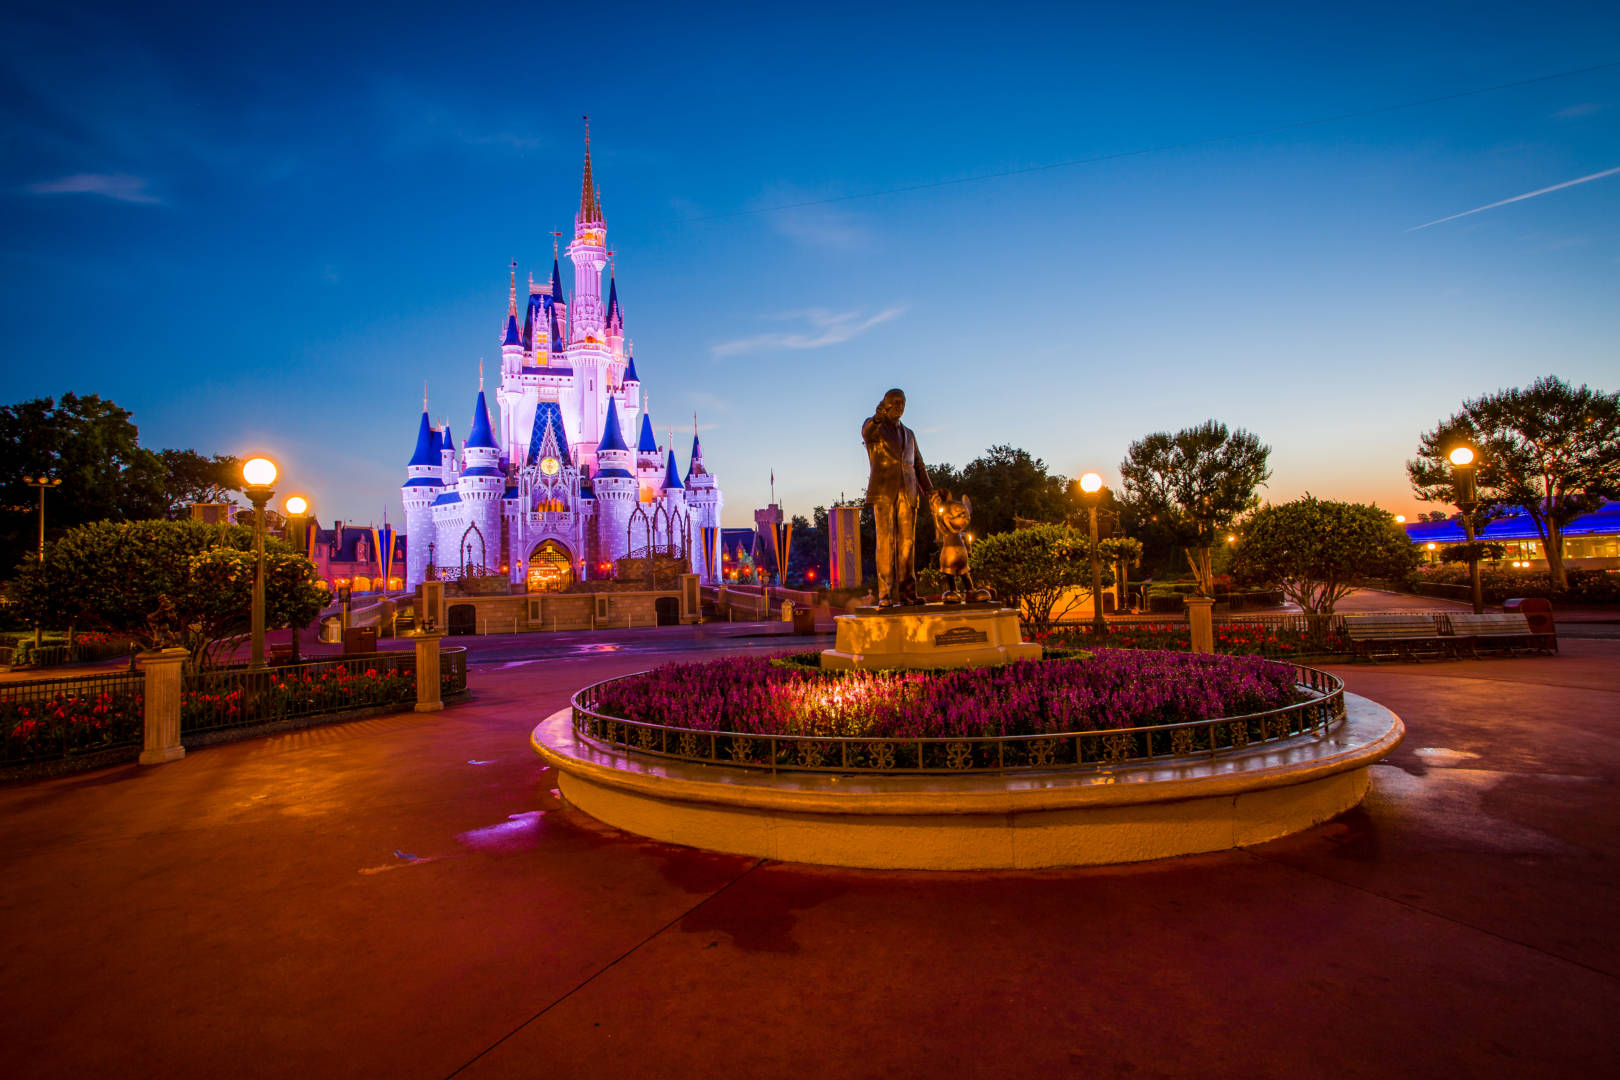 A beautiful view of the castle at Magic Kingdom. - Disneyland